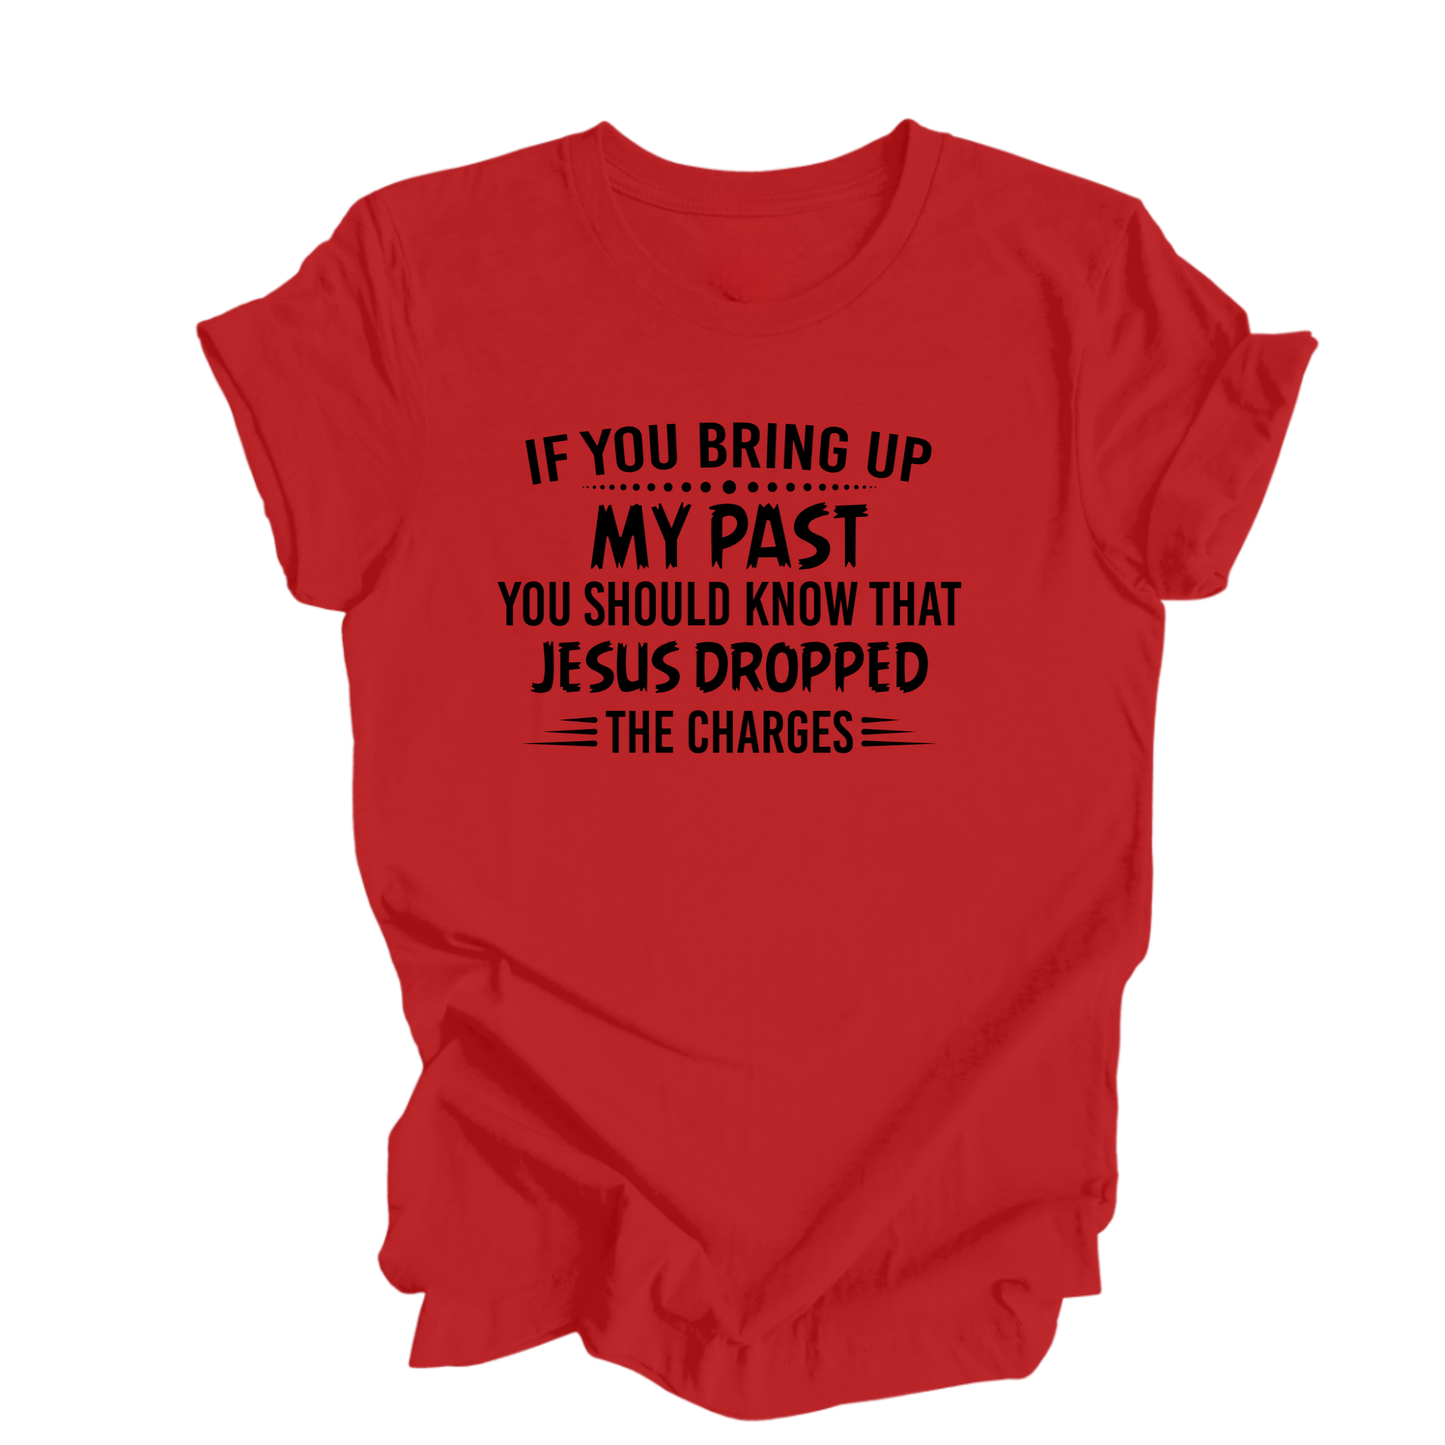 Jesus Dropped the Charges T-Shirt